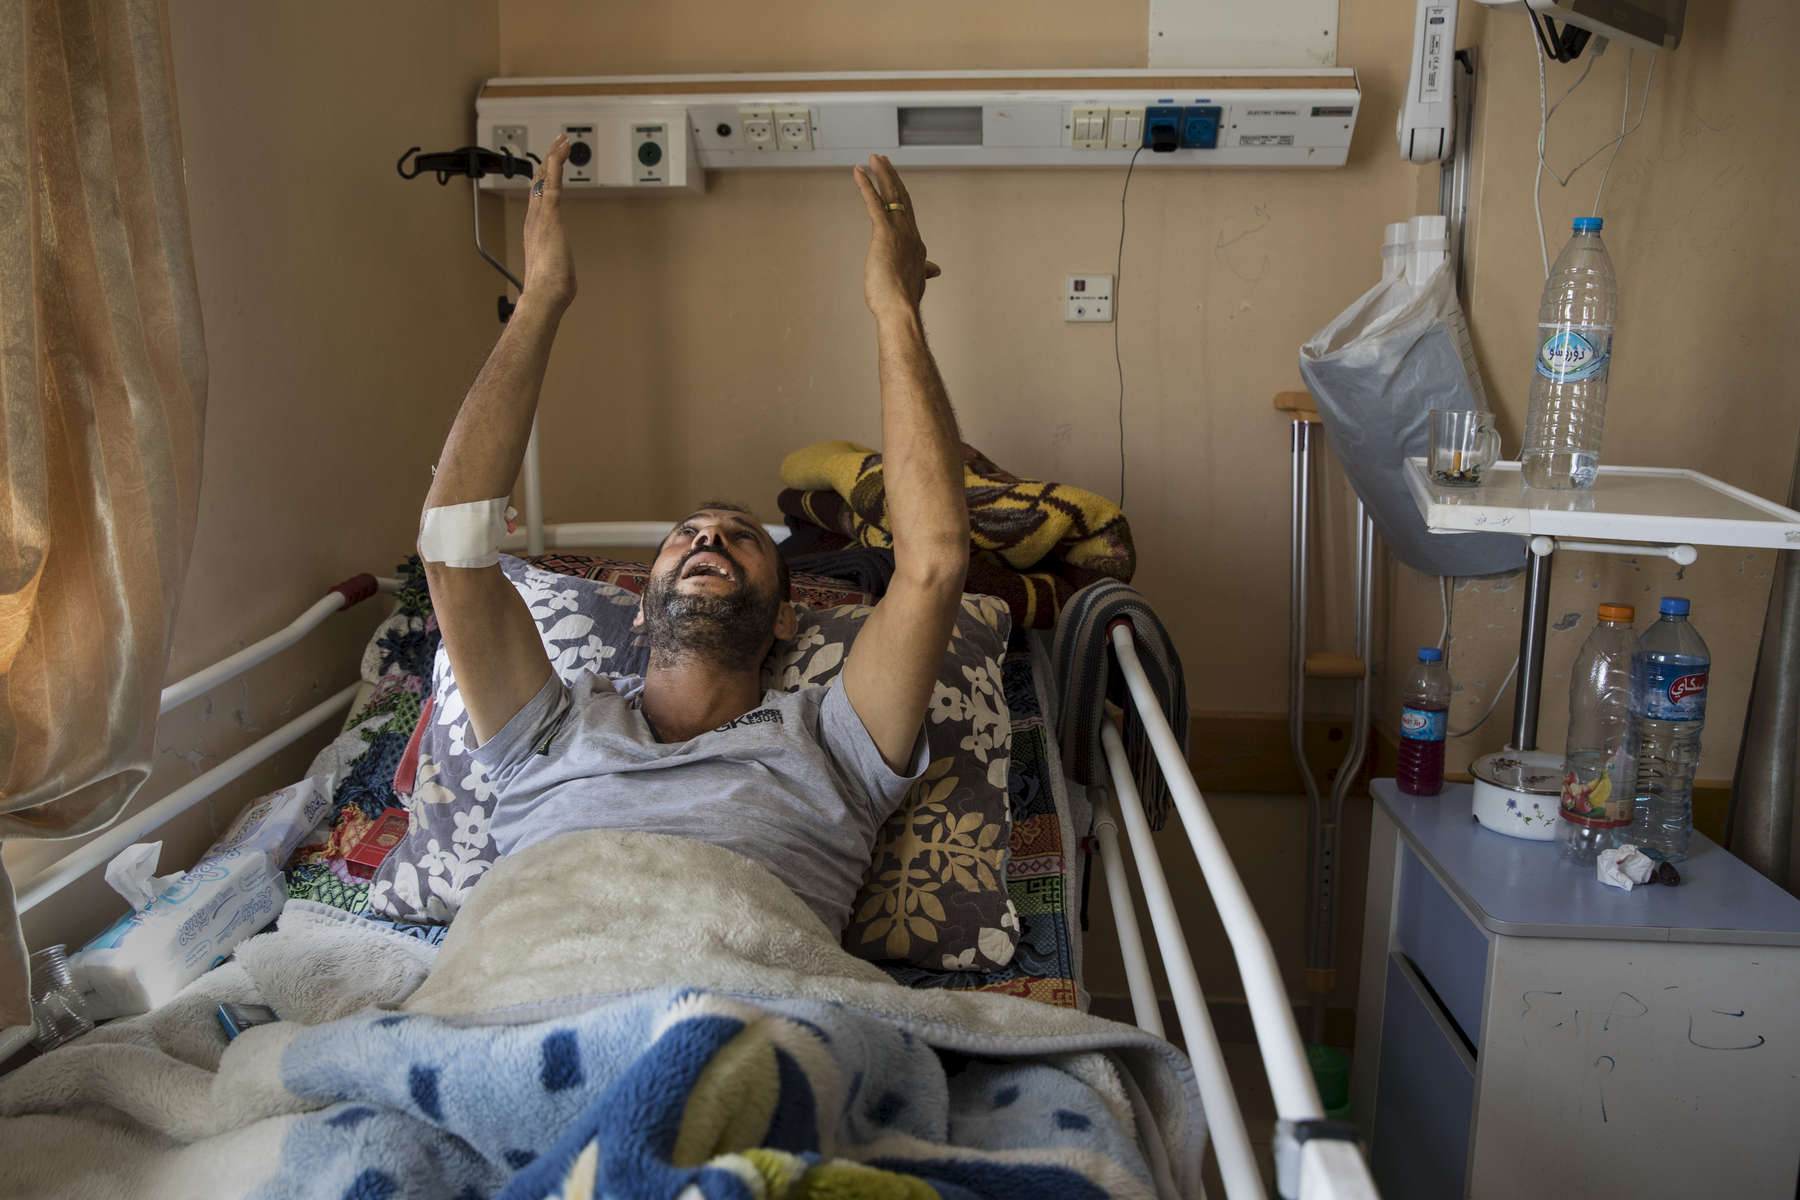 GAZA CITY, GAZA STRIP- MAY 20,2018: A patient prays for his pain to be relieved from his bed at the Al Shifa hospital on May 20, 2018 in Gaza Strip. According to the International Committee of the Red Cross (ICRC), 13,000 Palestinians were wounded (as of June 19, 2018), the majority severely, with some 1,400 struck by three to five bullets. No Israelis were physically harmed during this time period, Israel's use of deadly force was condemned during the UN general assembly on June 13 th along with other human rights organizations.The Israeli military (IDF) started using new weaponry, explosive bullets that shatter bones, tissue, destroying veins and arteries, the aim is to create a handicapped community, especially amongst the young male population. Many of the wounded protesters have to undergo multiple surgeries to try to save their limbs, and in some cases amputation is the only solution. With limited healthcare available in Gaza many were sent to Jordan and Turkey for further treatment. More issues that plague Gaza include a water supply that is 95 percent contaminated and a population forced to live without electricity for 21 hours a day. Gaza is compared to Venezuela with almost half of it’s labor force unemployed. Everyone is well aware that Gaza's two million inhabitants are trapped in a cycle of violence and poverty, living in an open air prison. The problems and complications affecting Gaza today are overwhelming. The world, seemingly accustomed to the suffering of the Gazan people turns a blind eye. (Photo by Paula Bronstein ) 